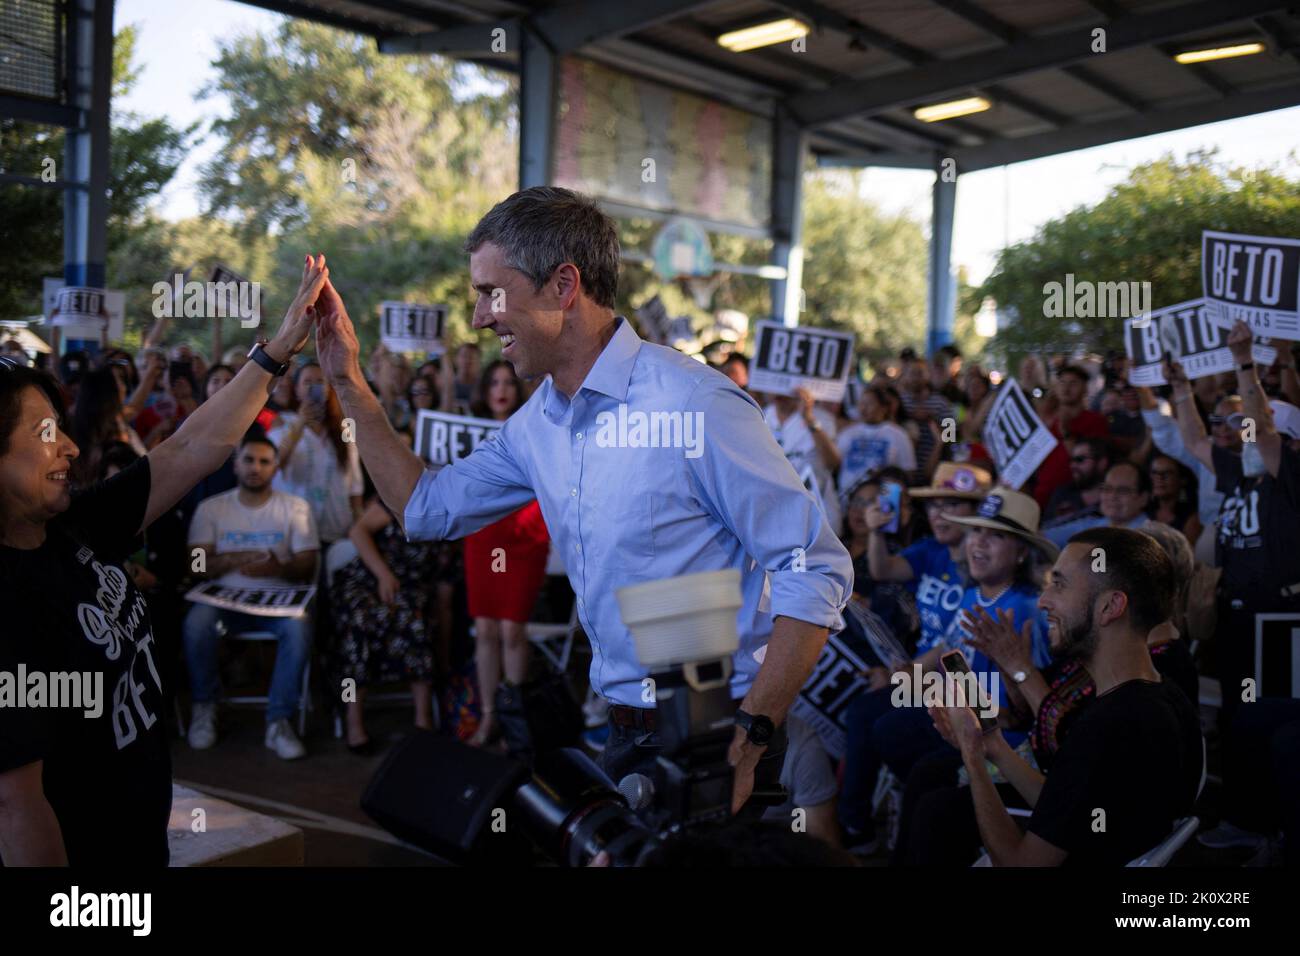 Texas Democratic gubernatorial candidate and former U.S. congressman Beto O'Rourke greets a supporter at a campaign event in Houston, Texas, U.S. September 13, 2022. REUTERS/Adrees Latif Stock Photo